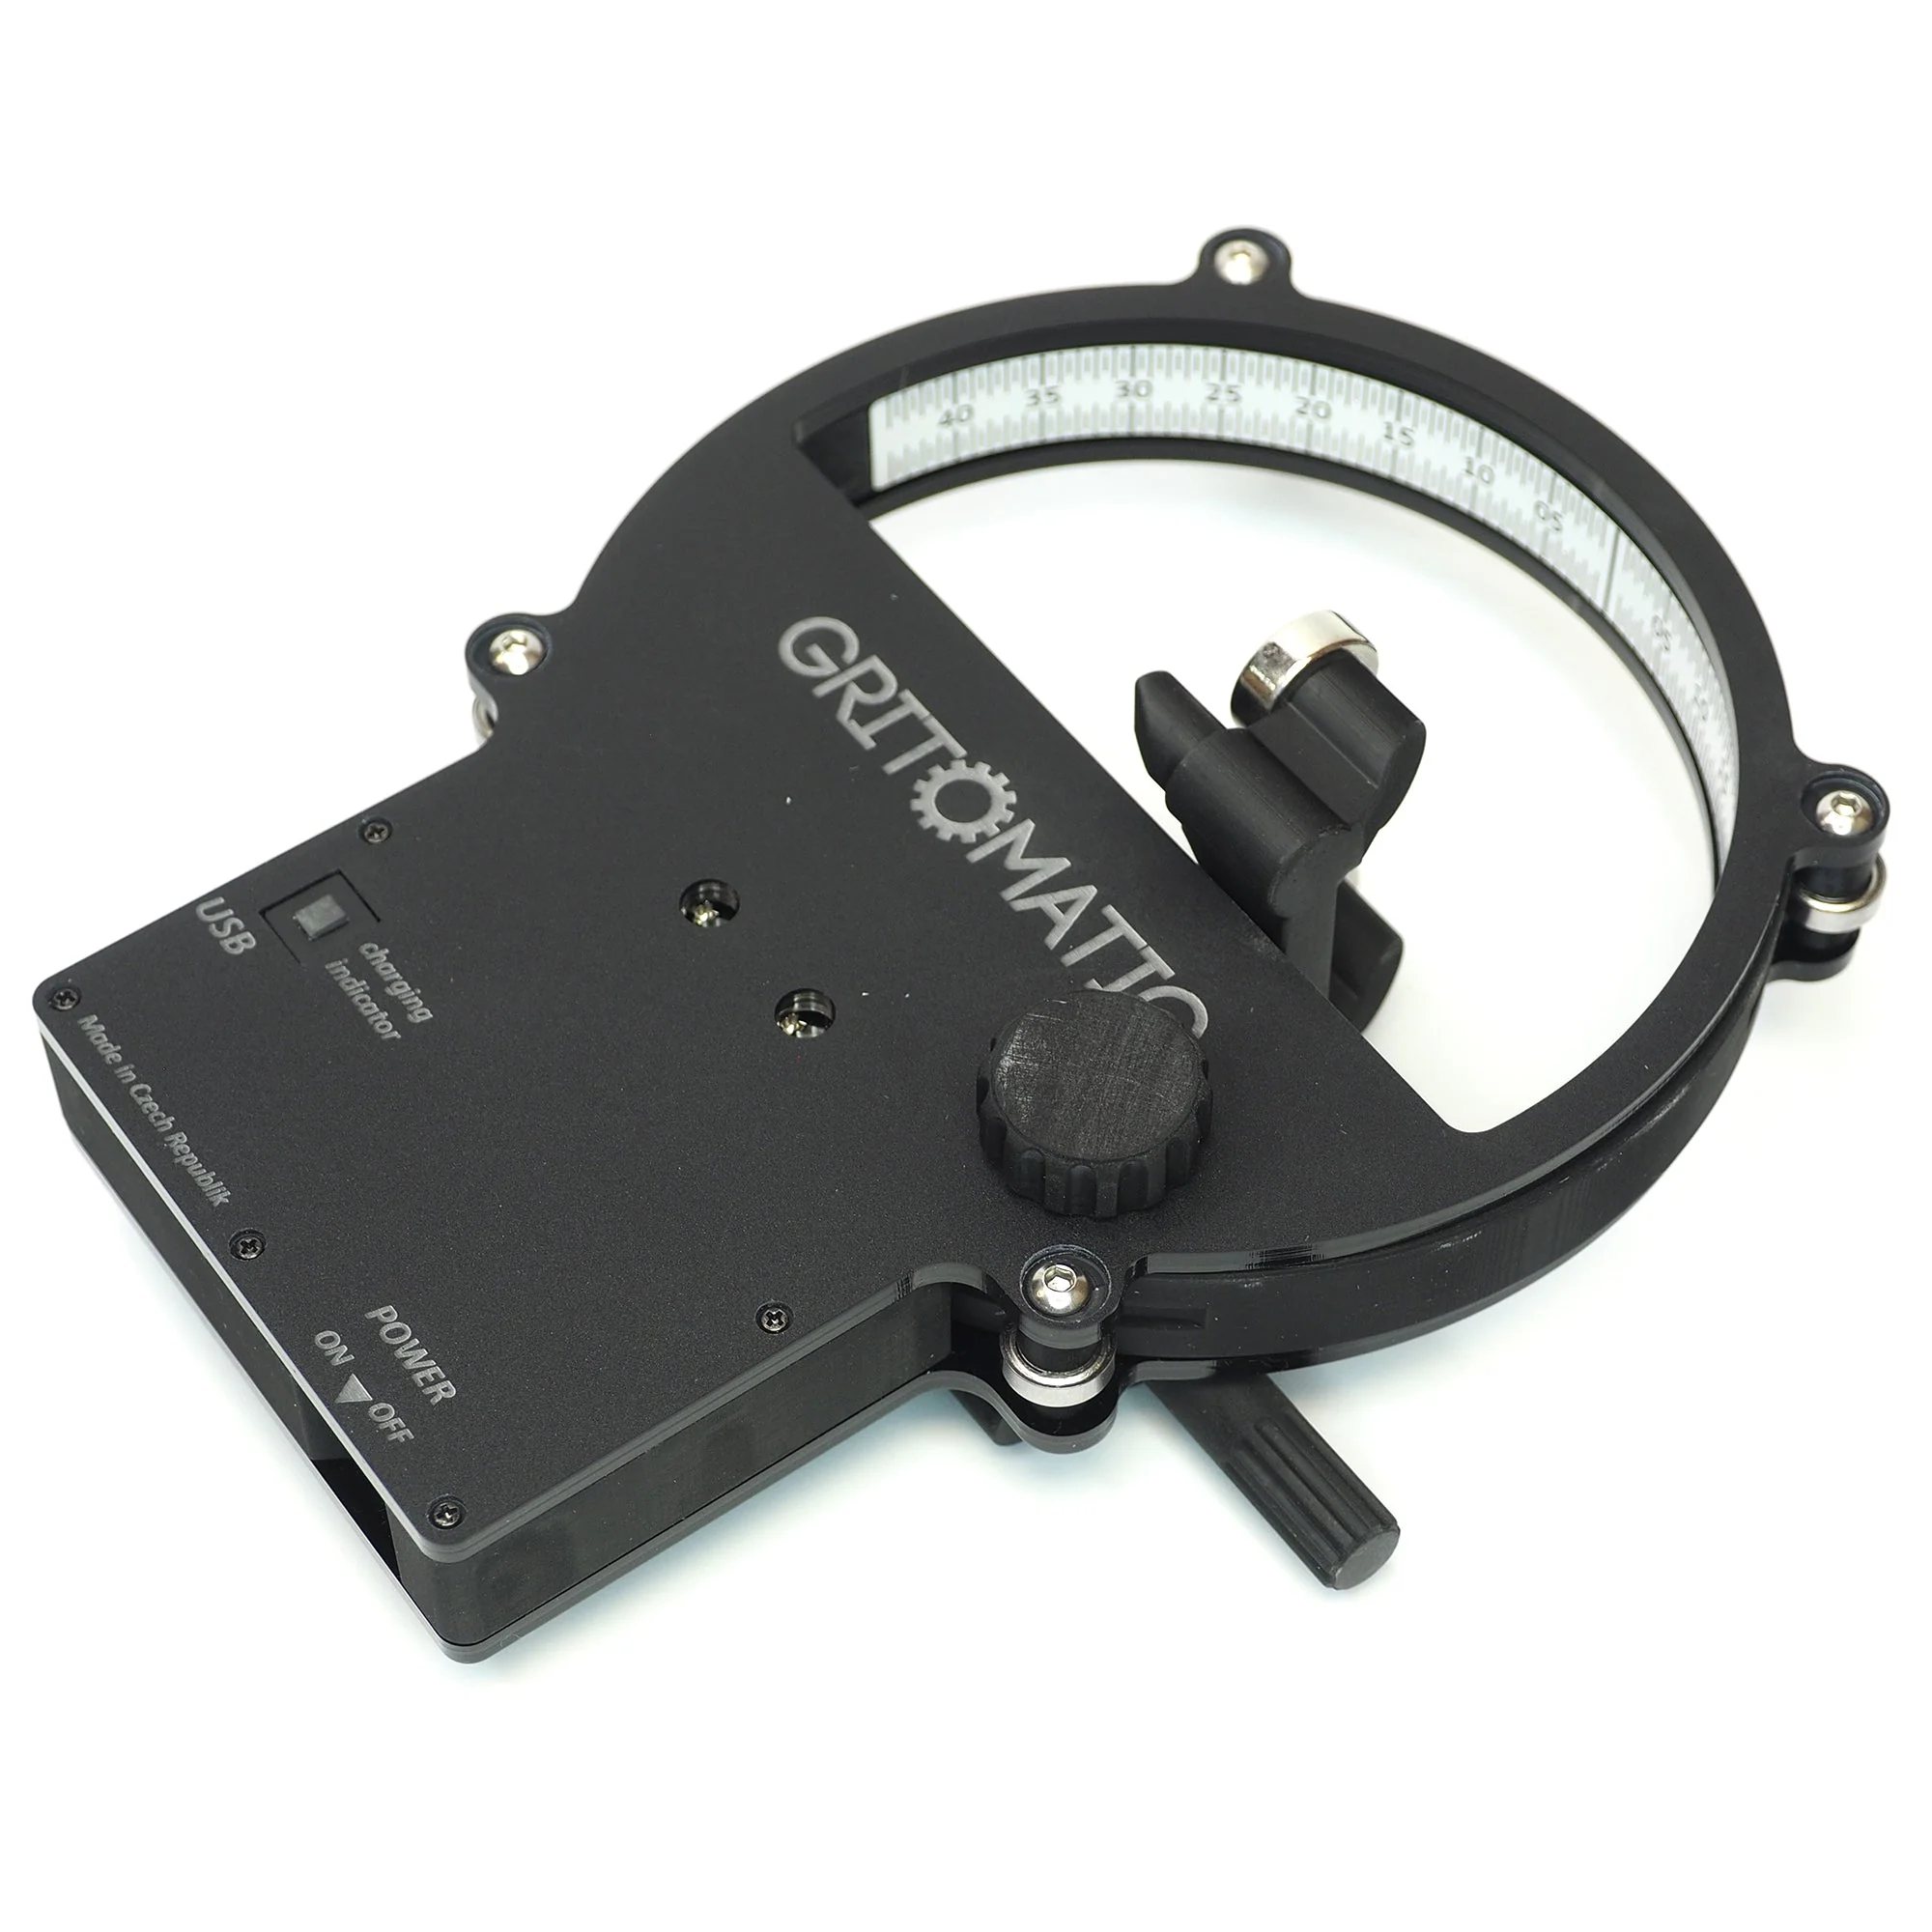 Do you have a in-stock date for the Gritomatic Laser Edge Goniometer MASTER?  I would like to order one.